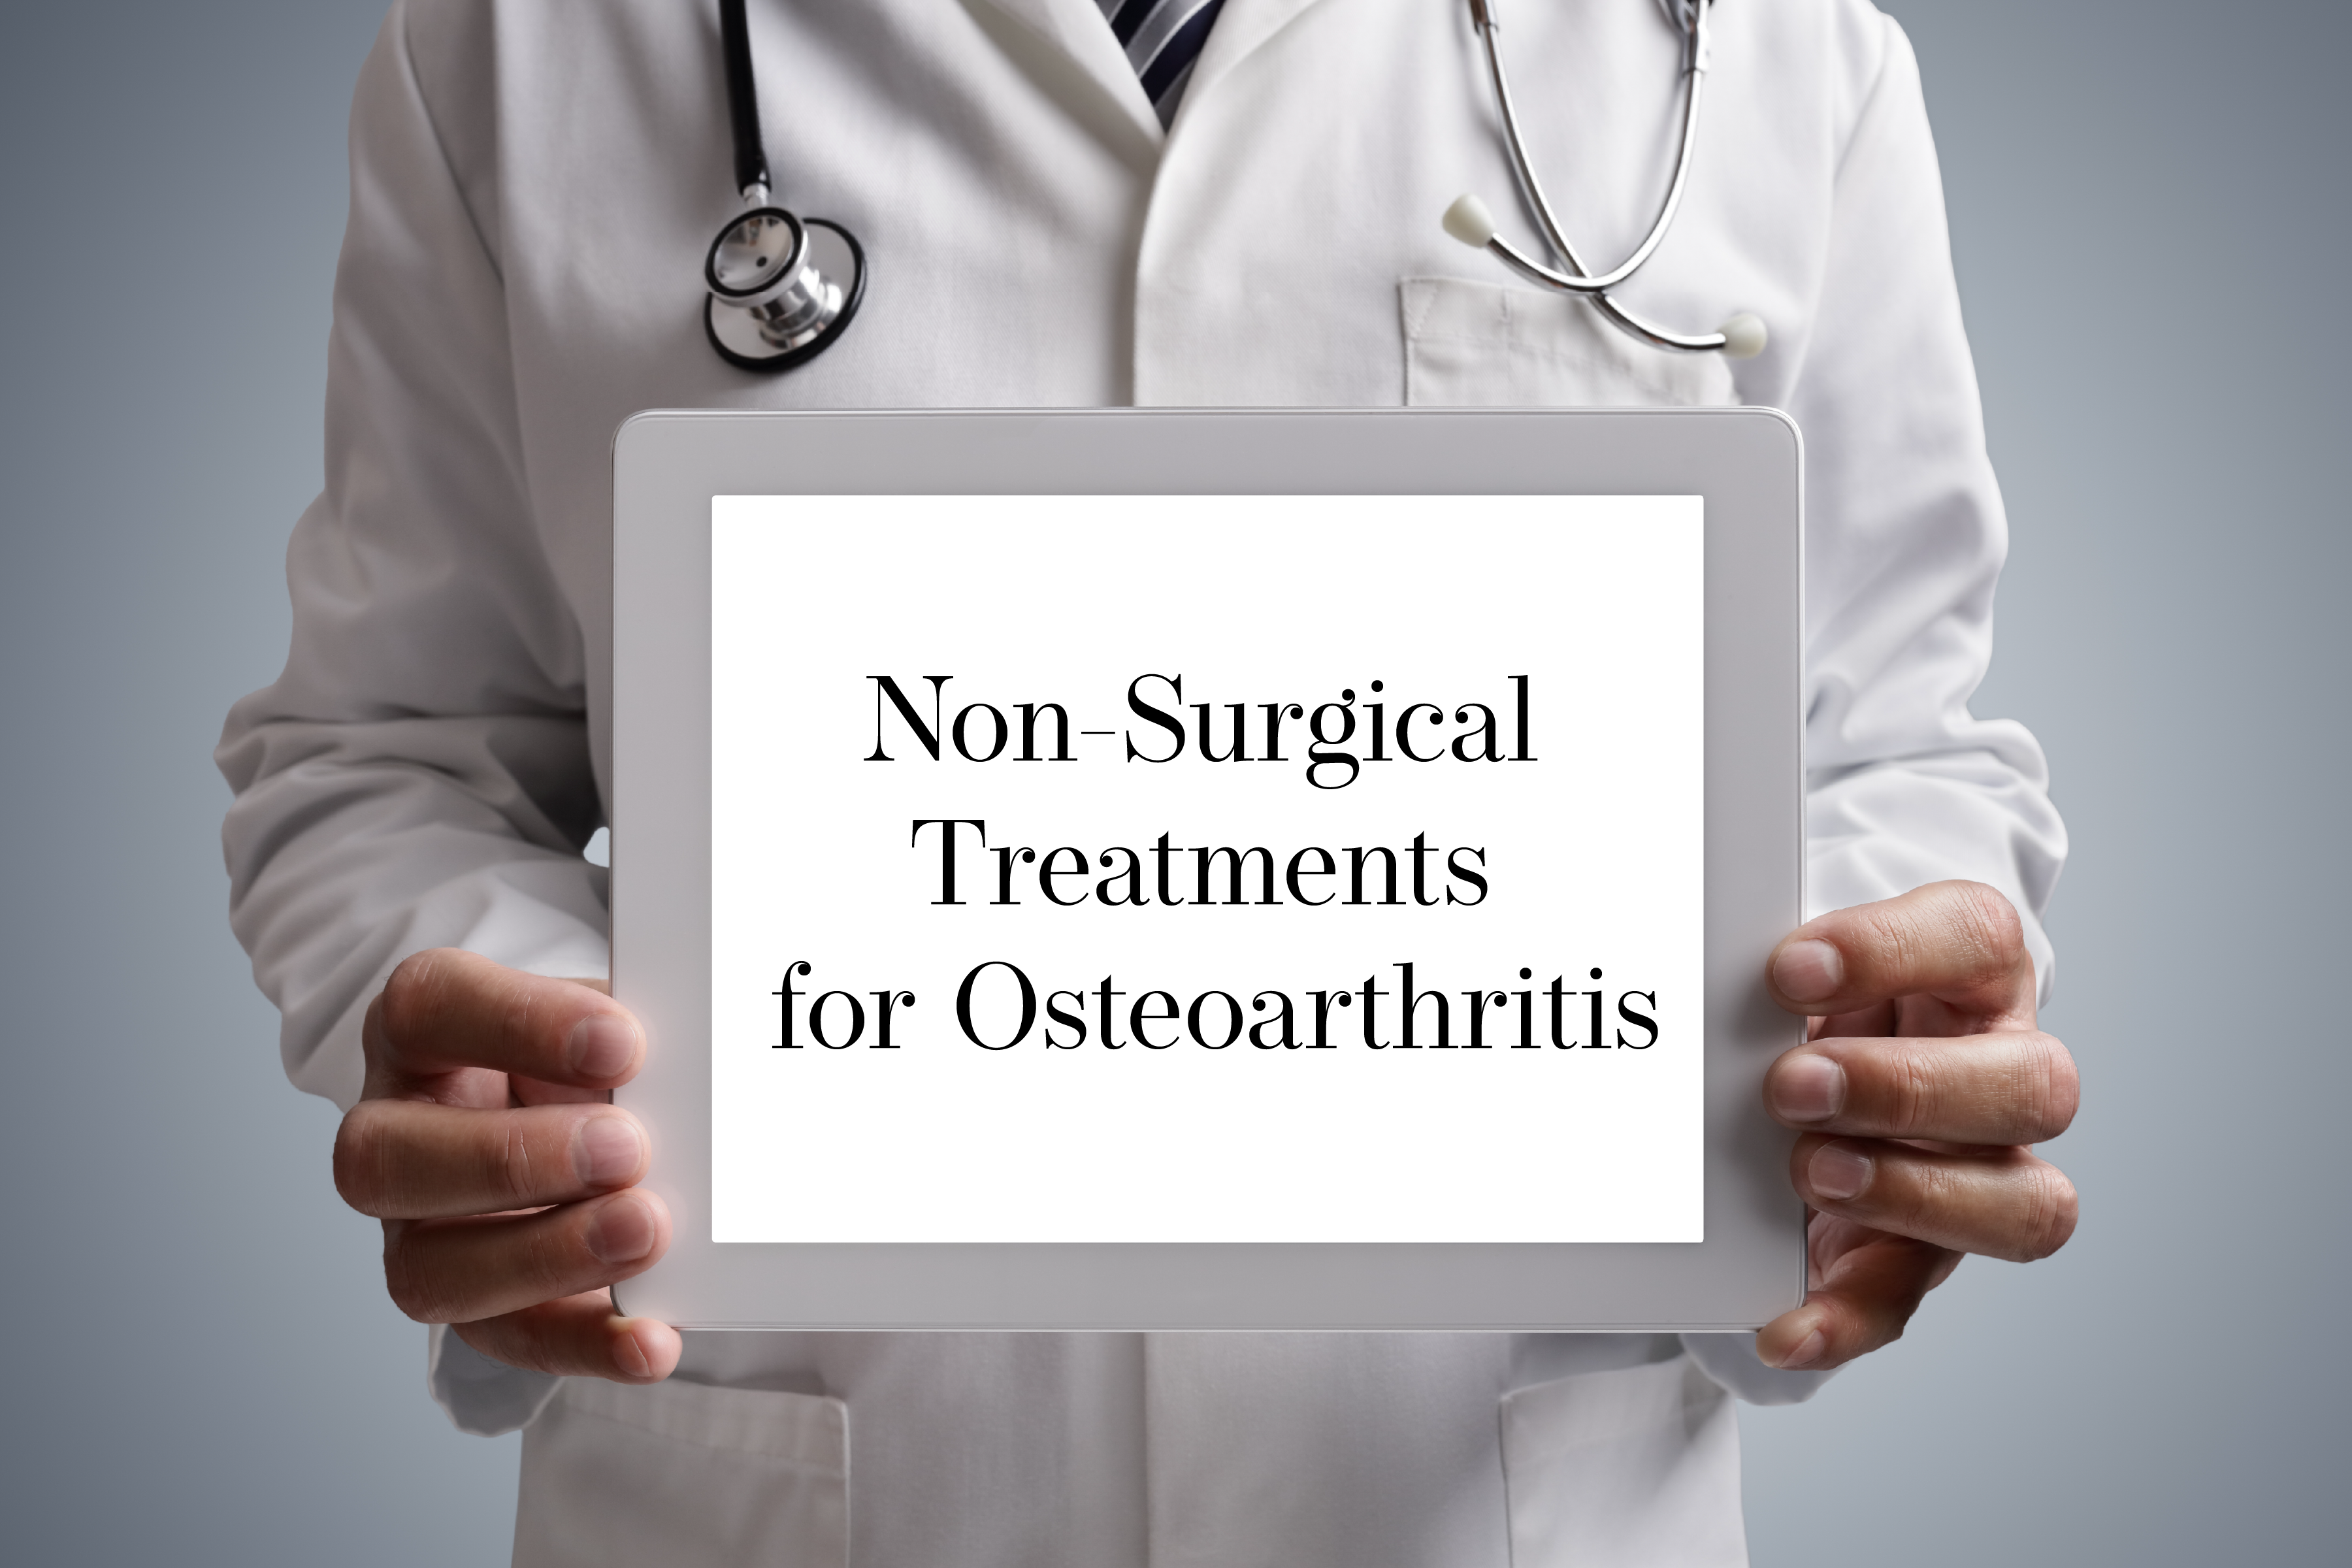 Non-Surgical Treatments For Osteoarthritis